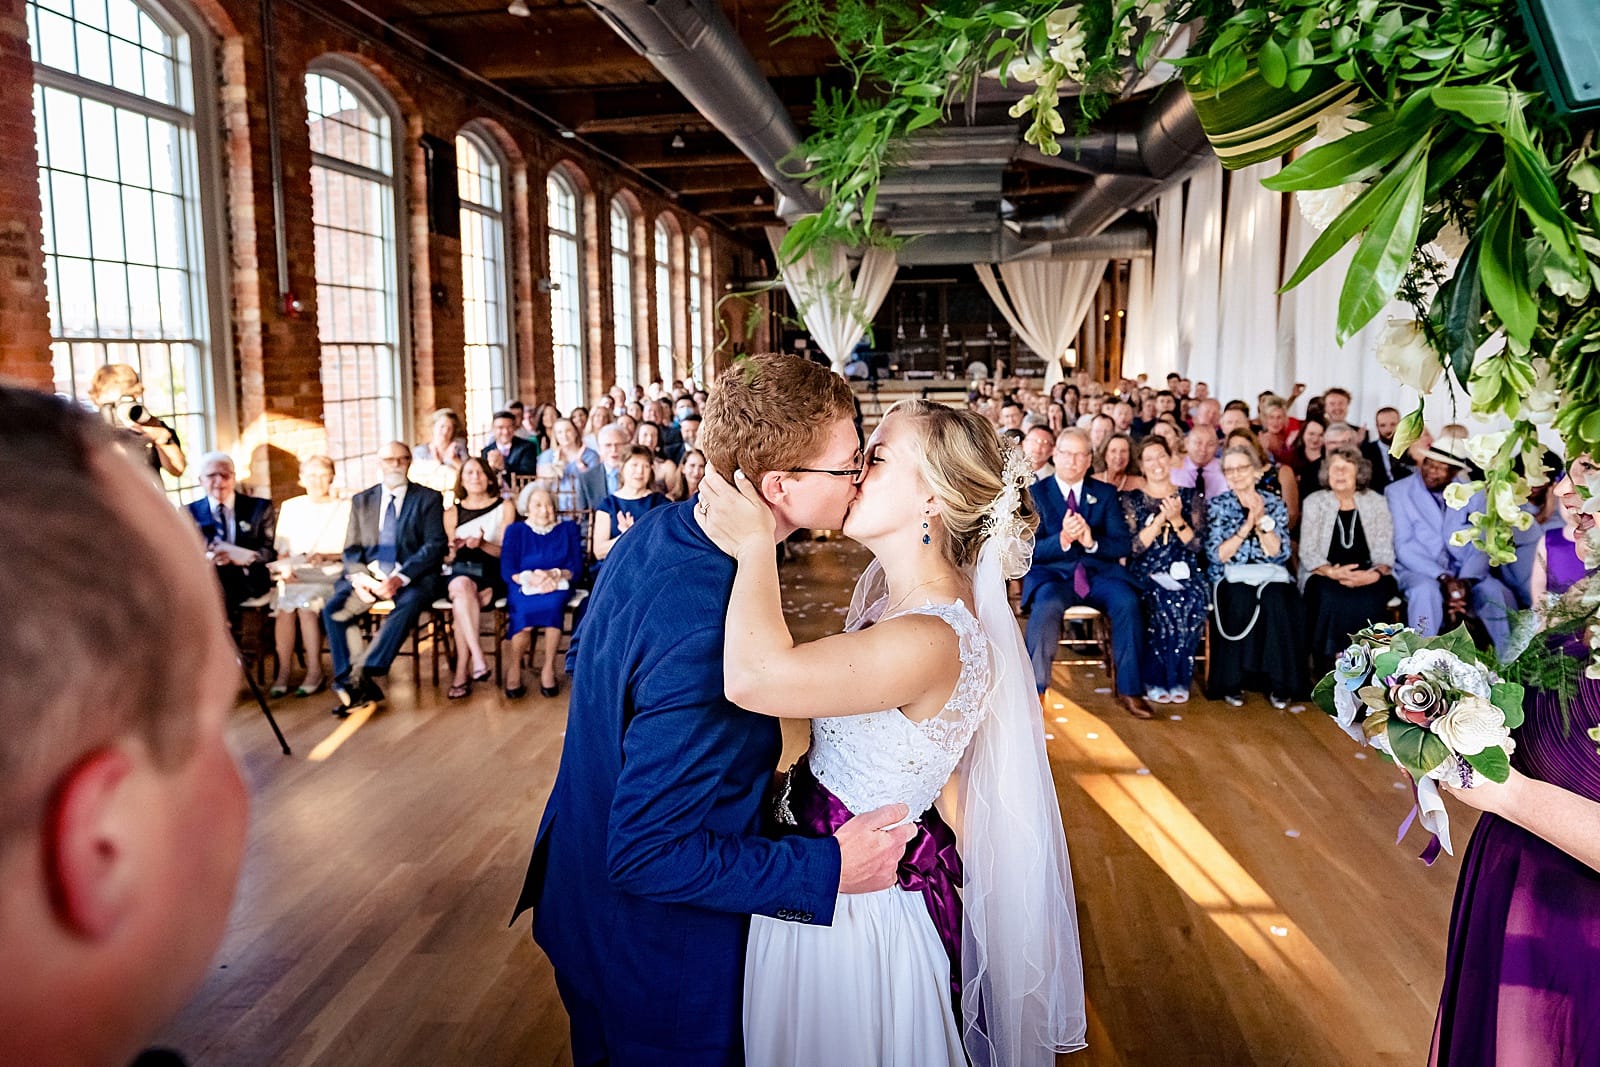 Ask your photographer to get an awesome unique angle of the proclamation and first kiss